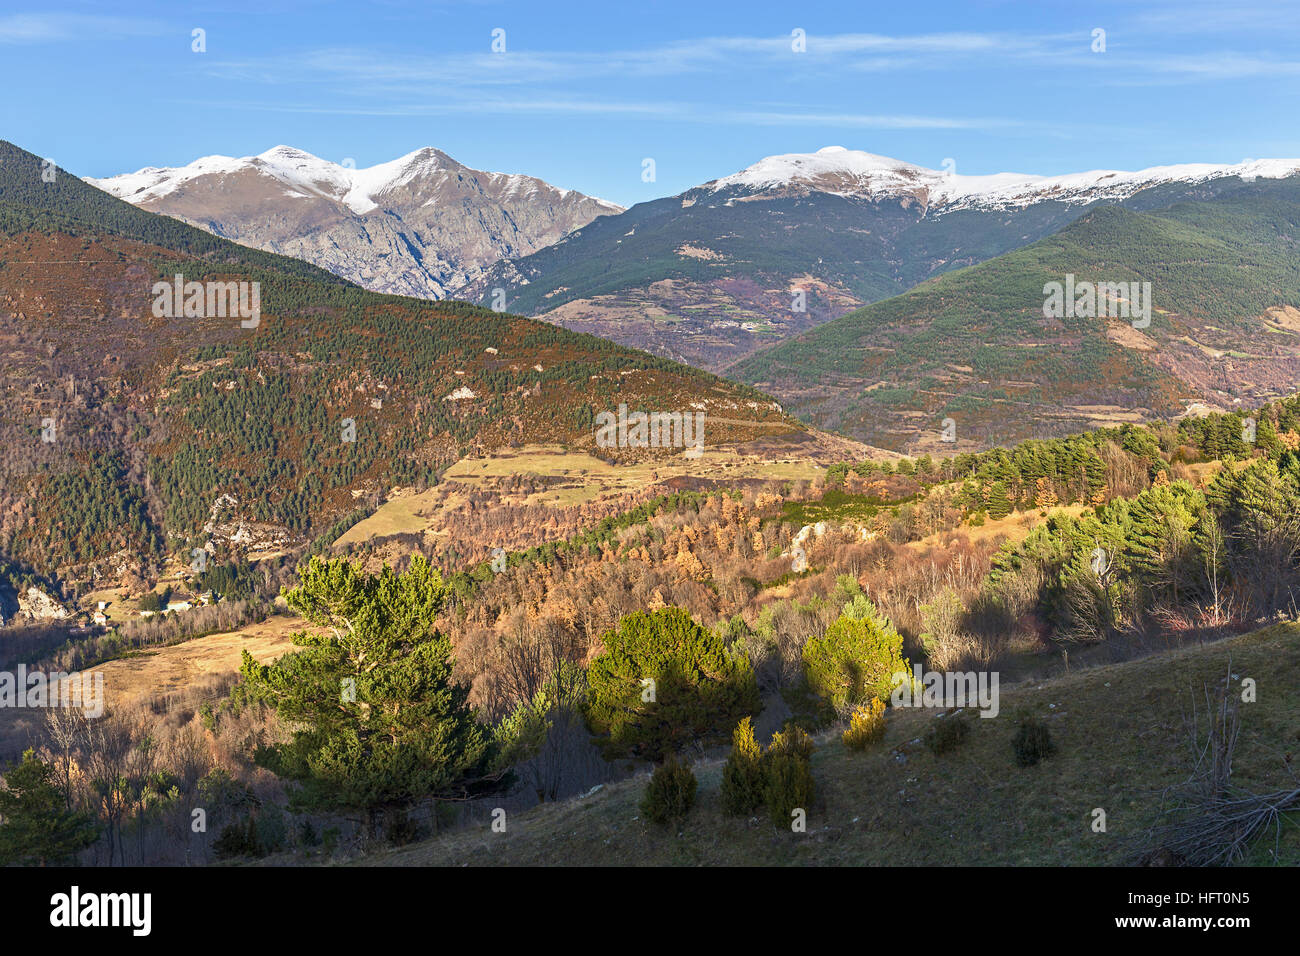 Pyrenees range view from Campelles, Catalonia Stock Photo